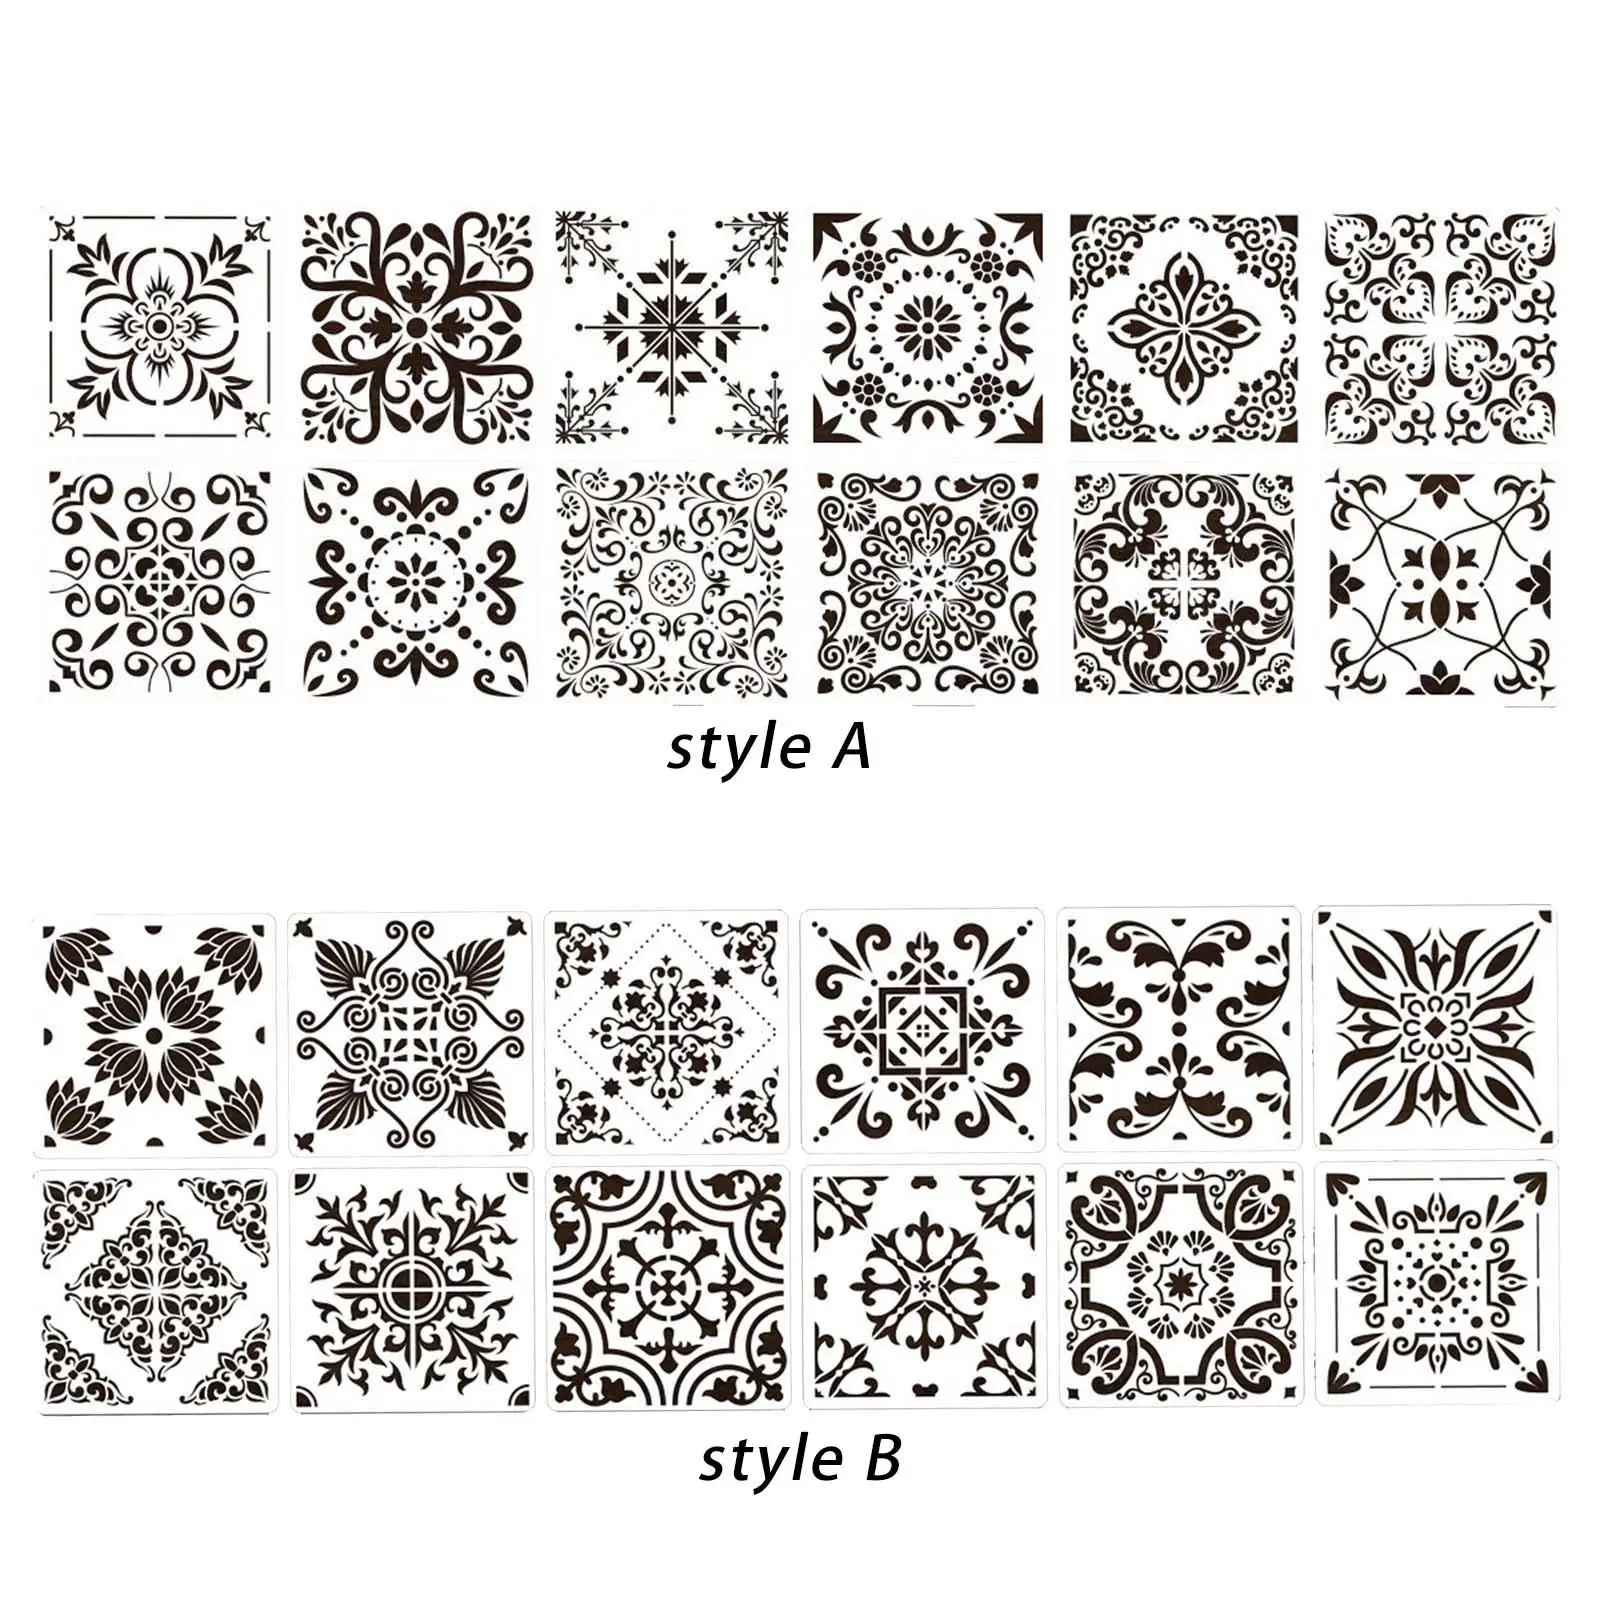 12Pcs Fashion Mandala Stencil Template DIY Craft Tool Handmade Reused Drawing Templates for School Wood Fabric Party Decoration